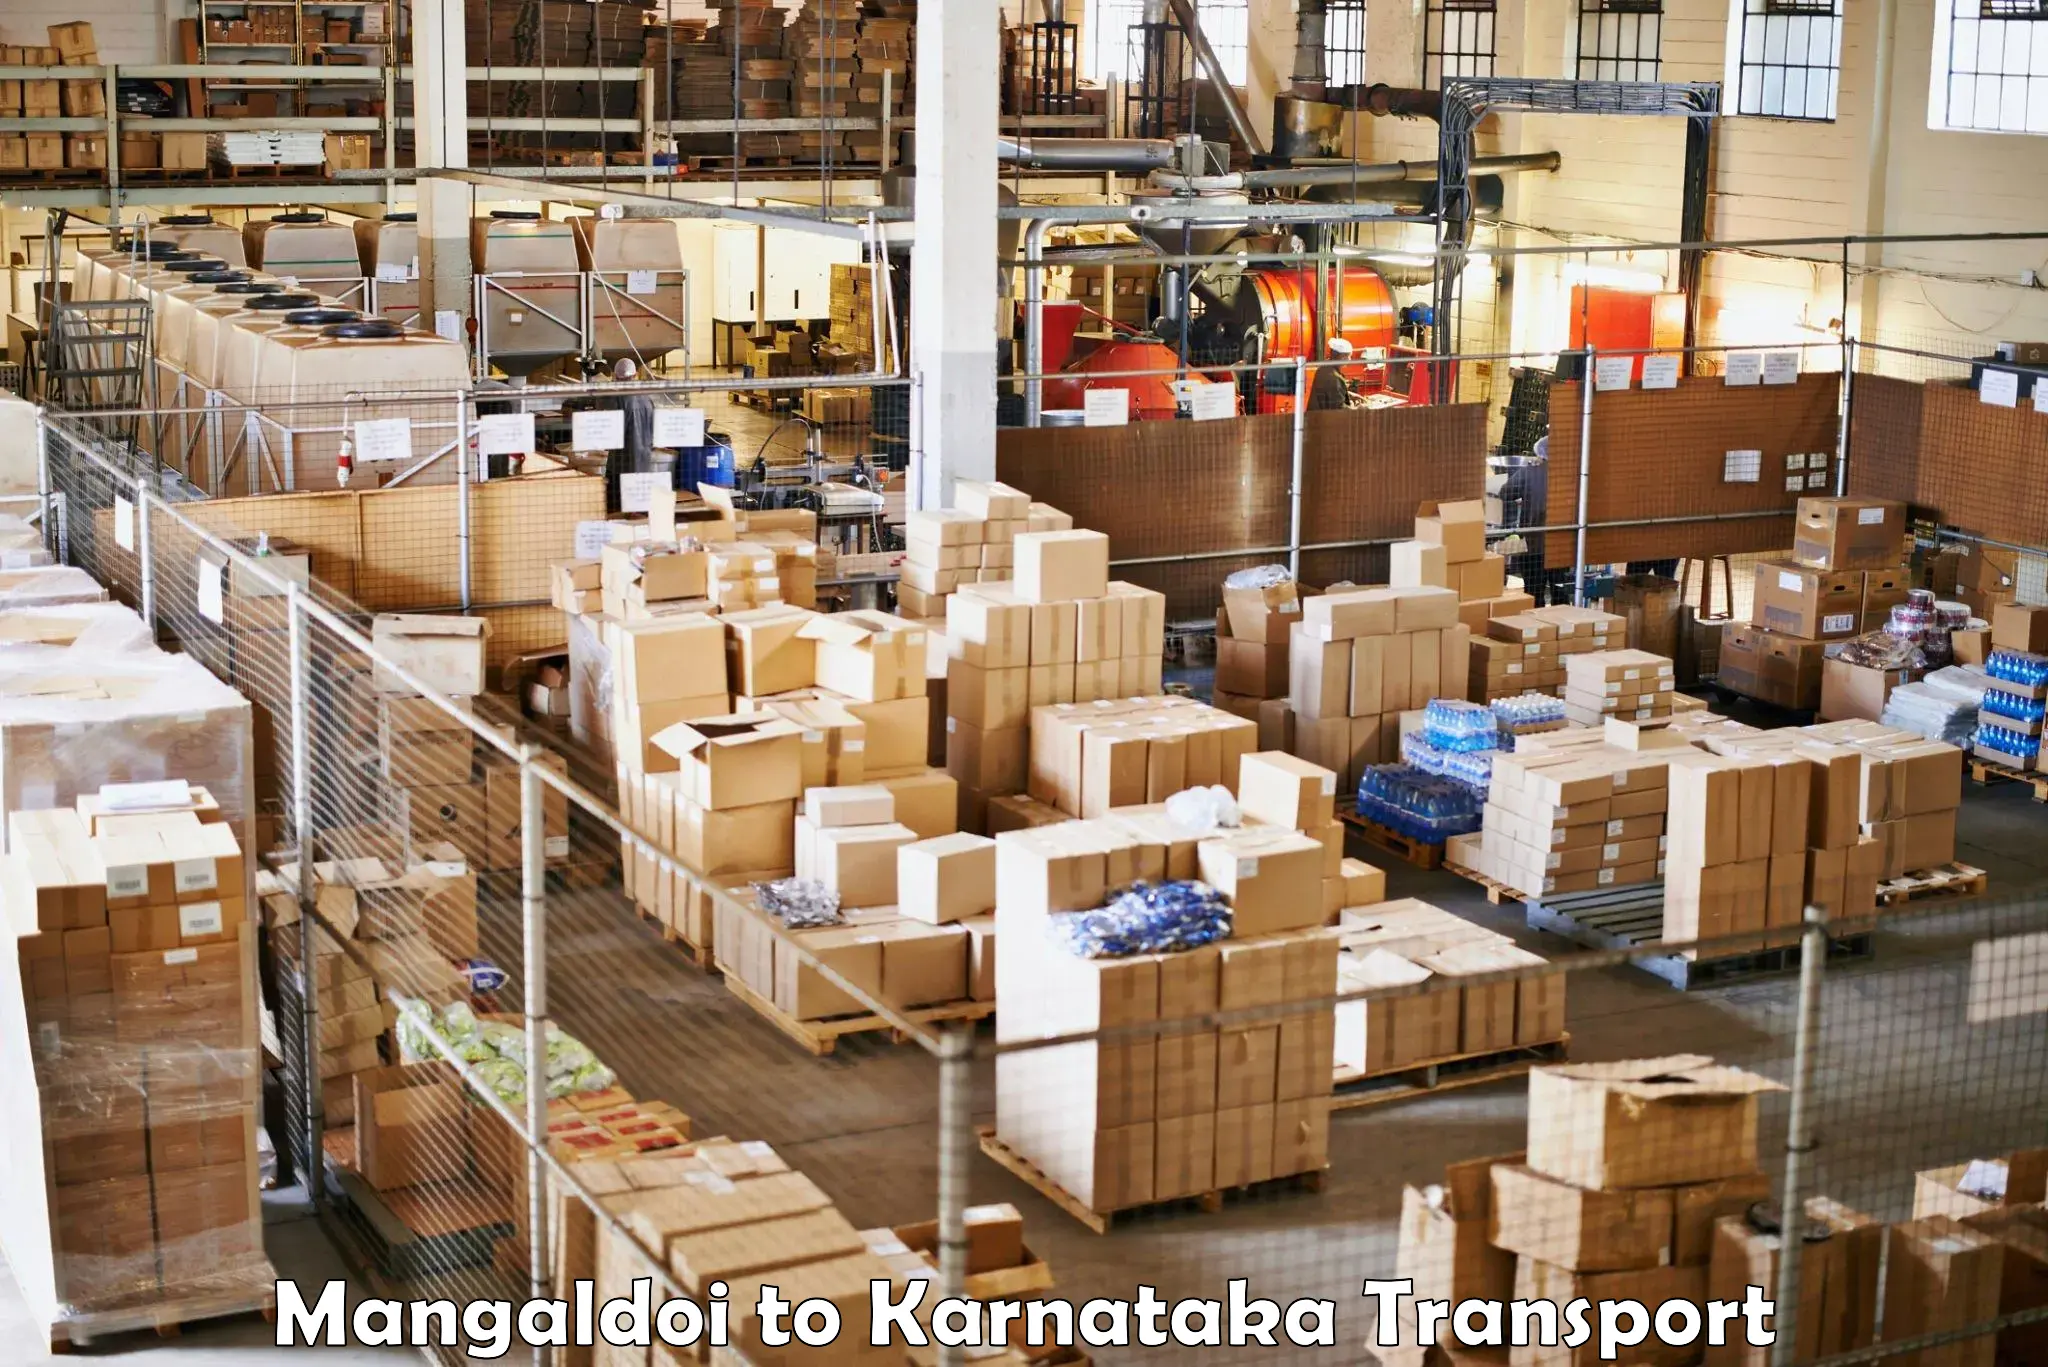 Part load transport service in India Mangaldoi to Indian Institute of Science Bangalore